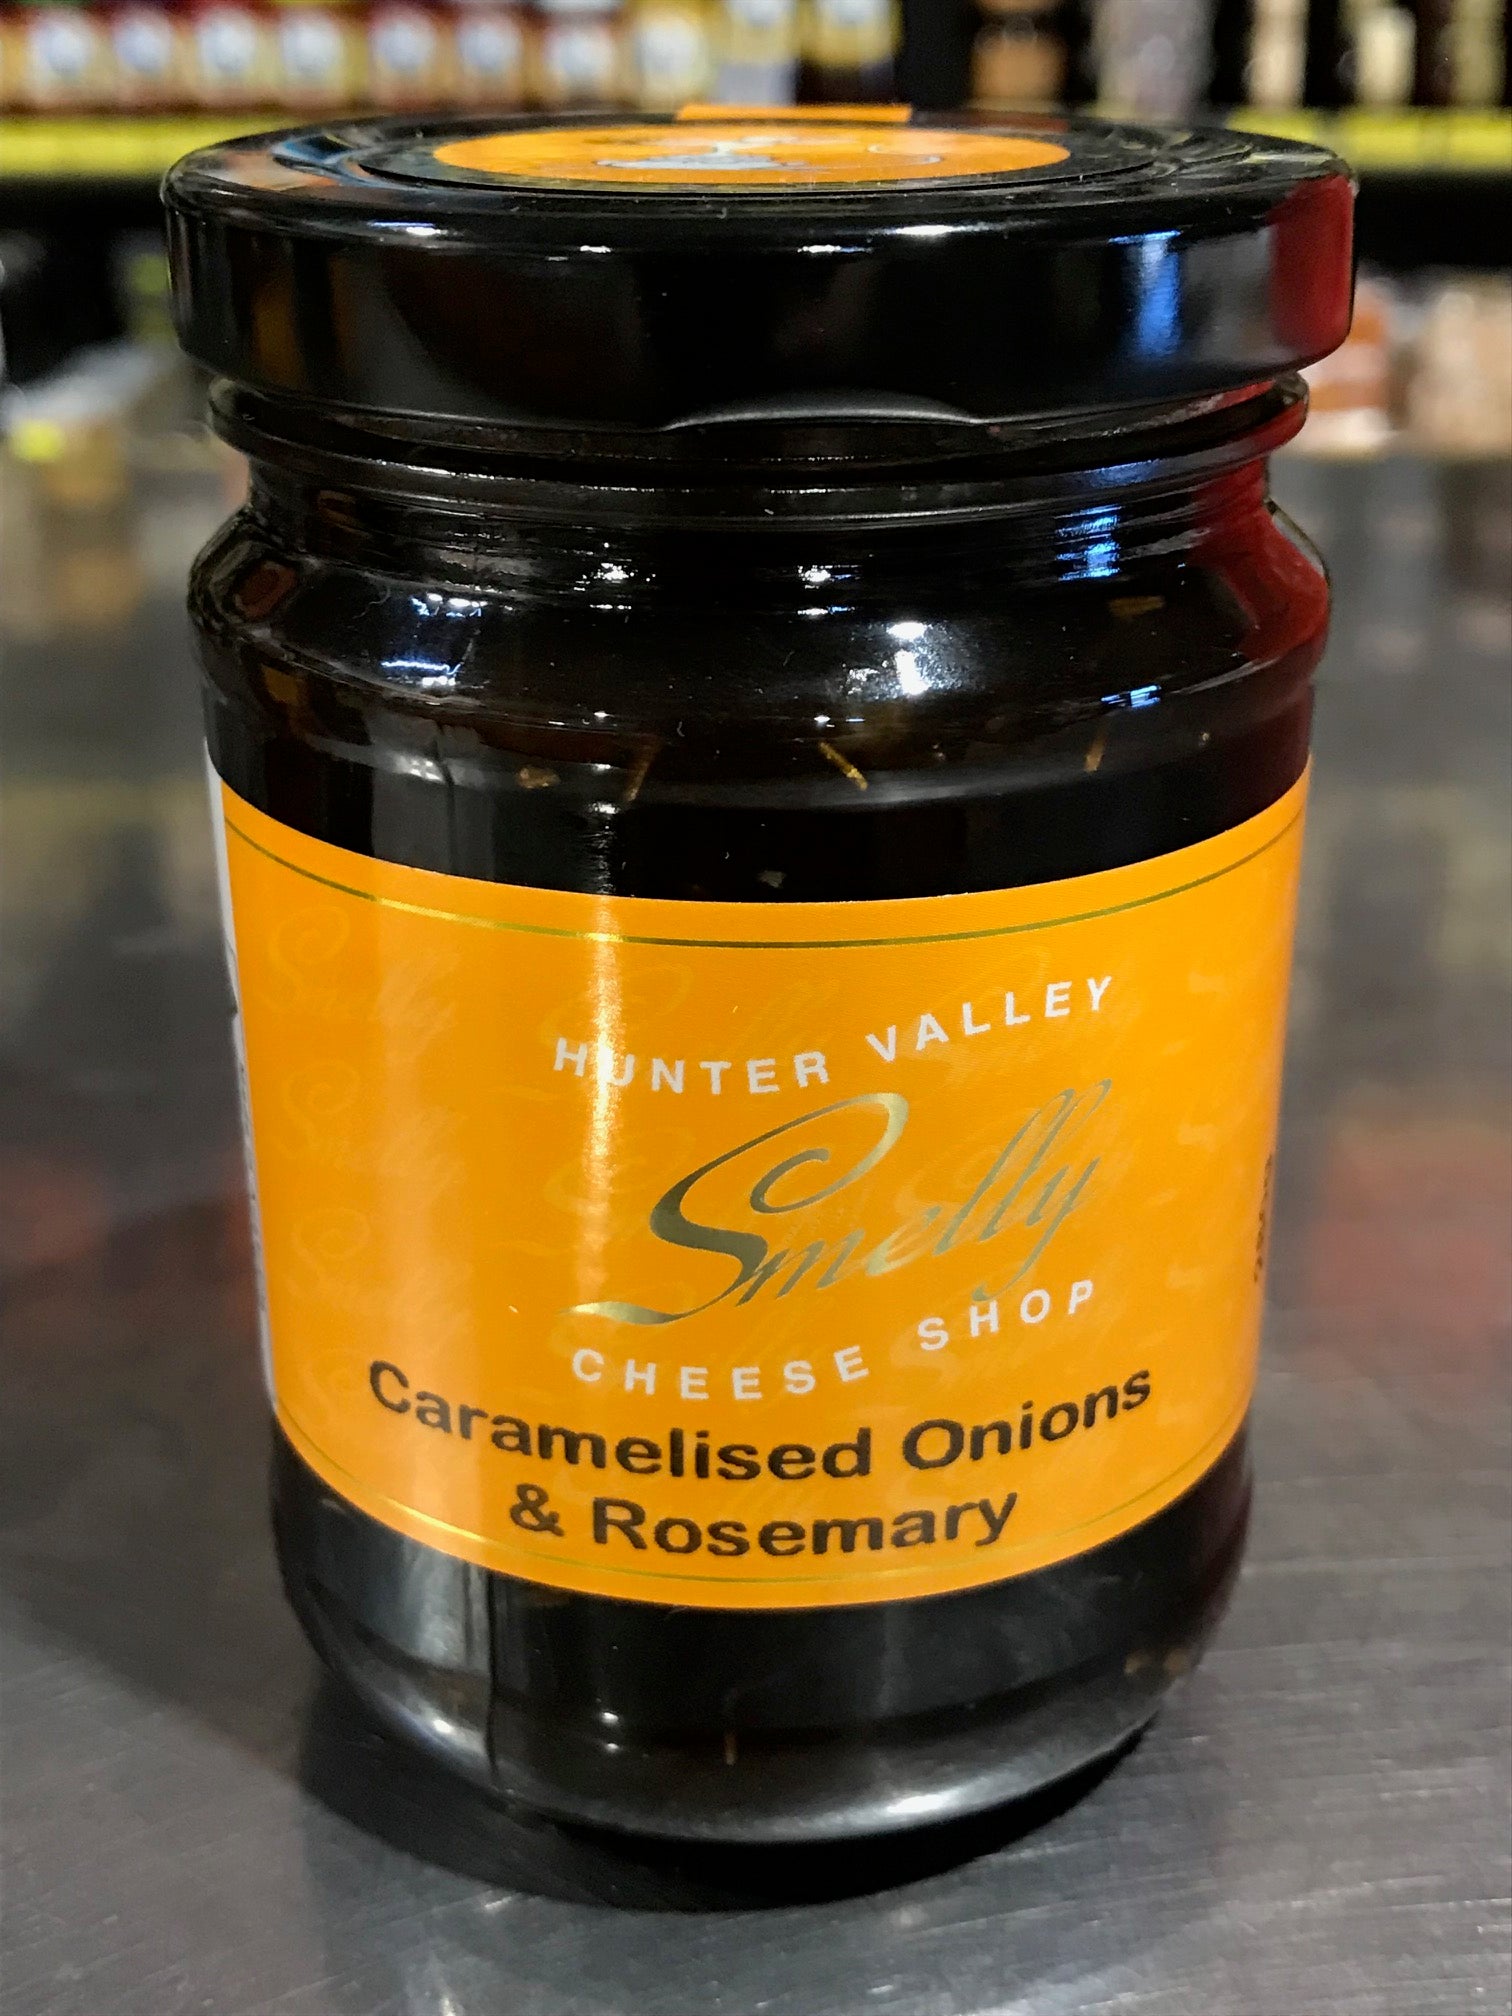 Hunter Valley Smelly Cheese Shop - Caramelised Onion and Rosemary